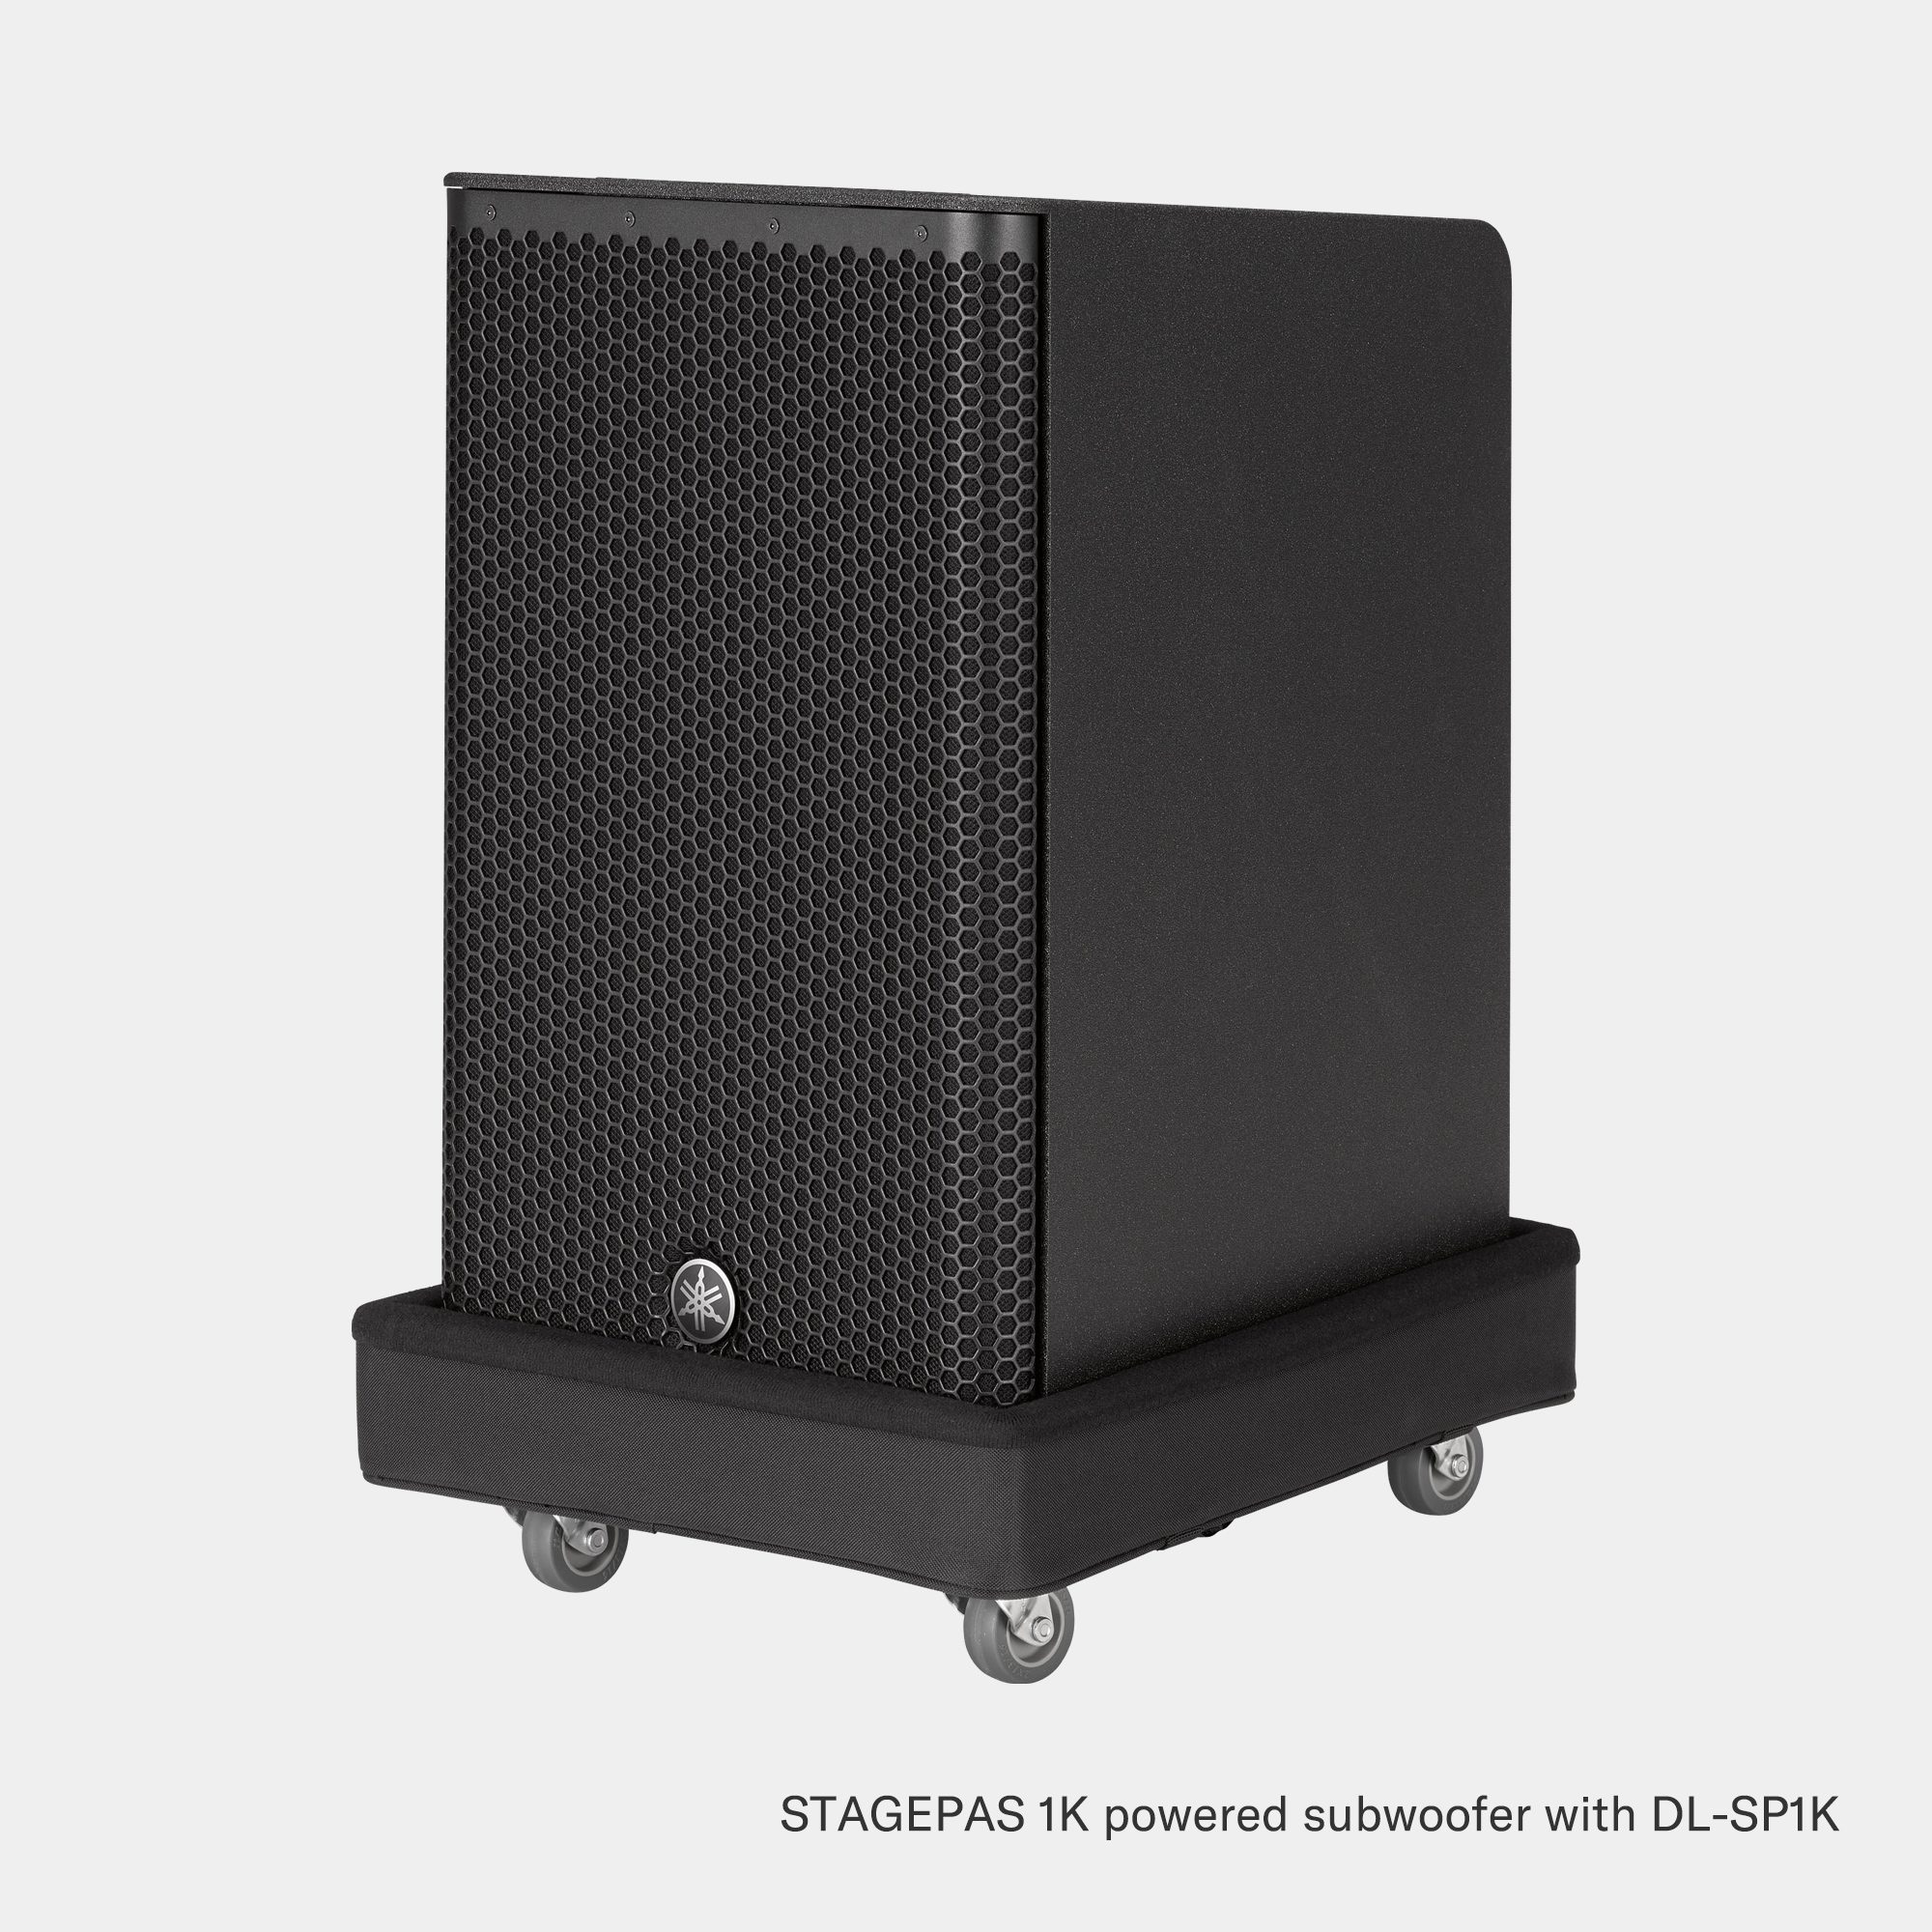 STAGEPAS 1K - Overview - PA Systems - Professional Audio 